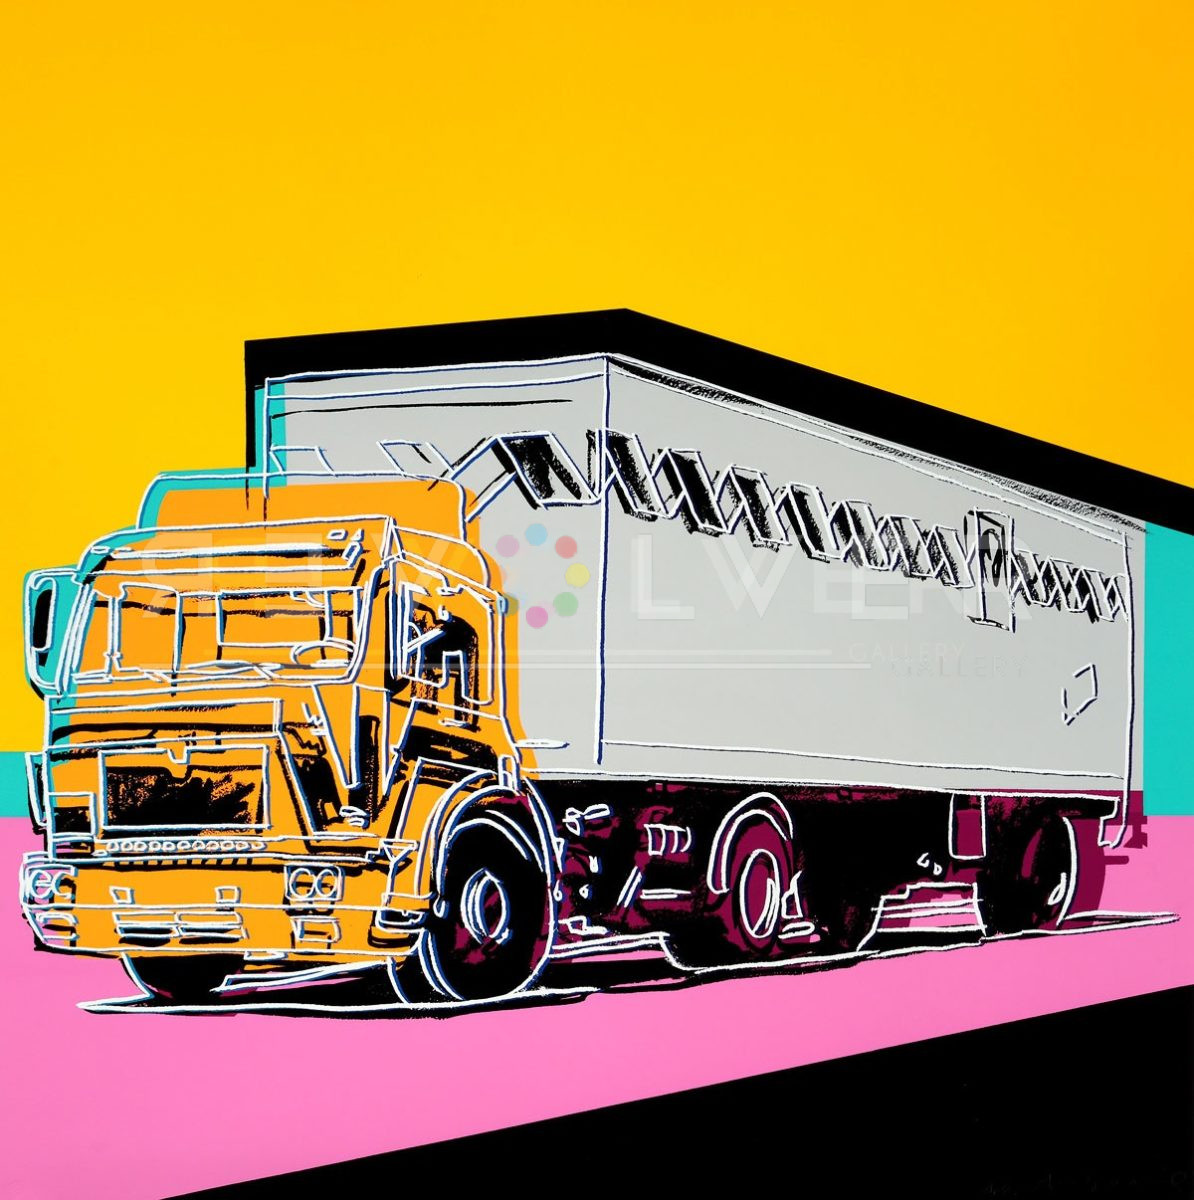 The Truck 367 print by Andy Warhol.